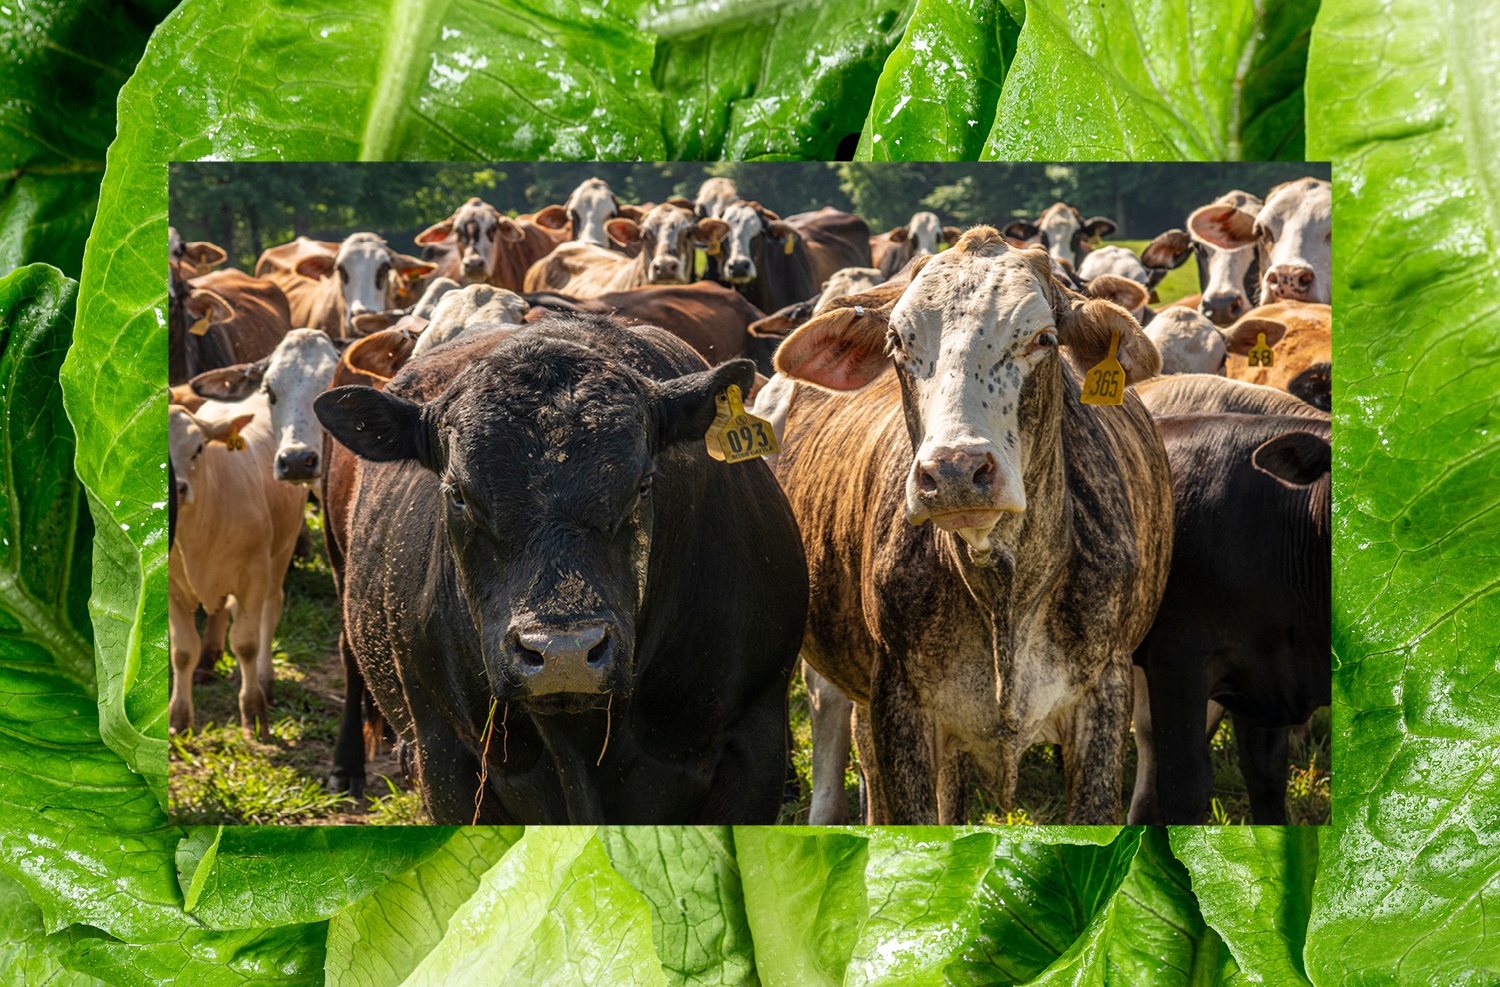 Cow manure leading to E. Coli outbreak May 2020